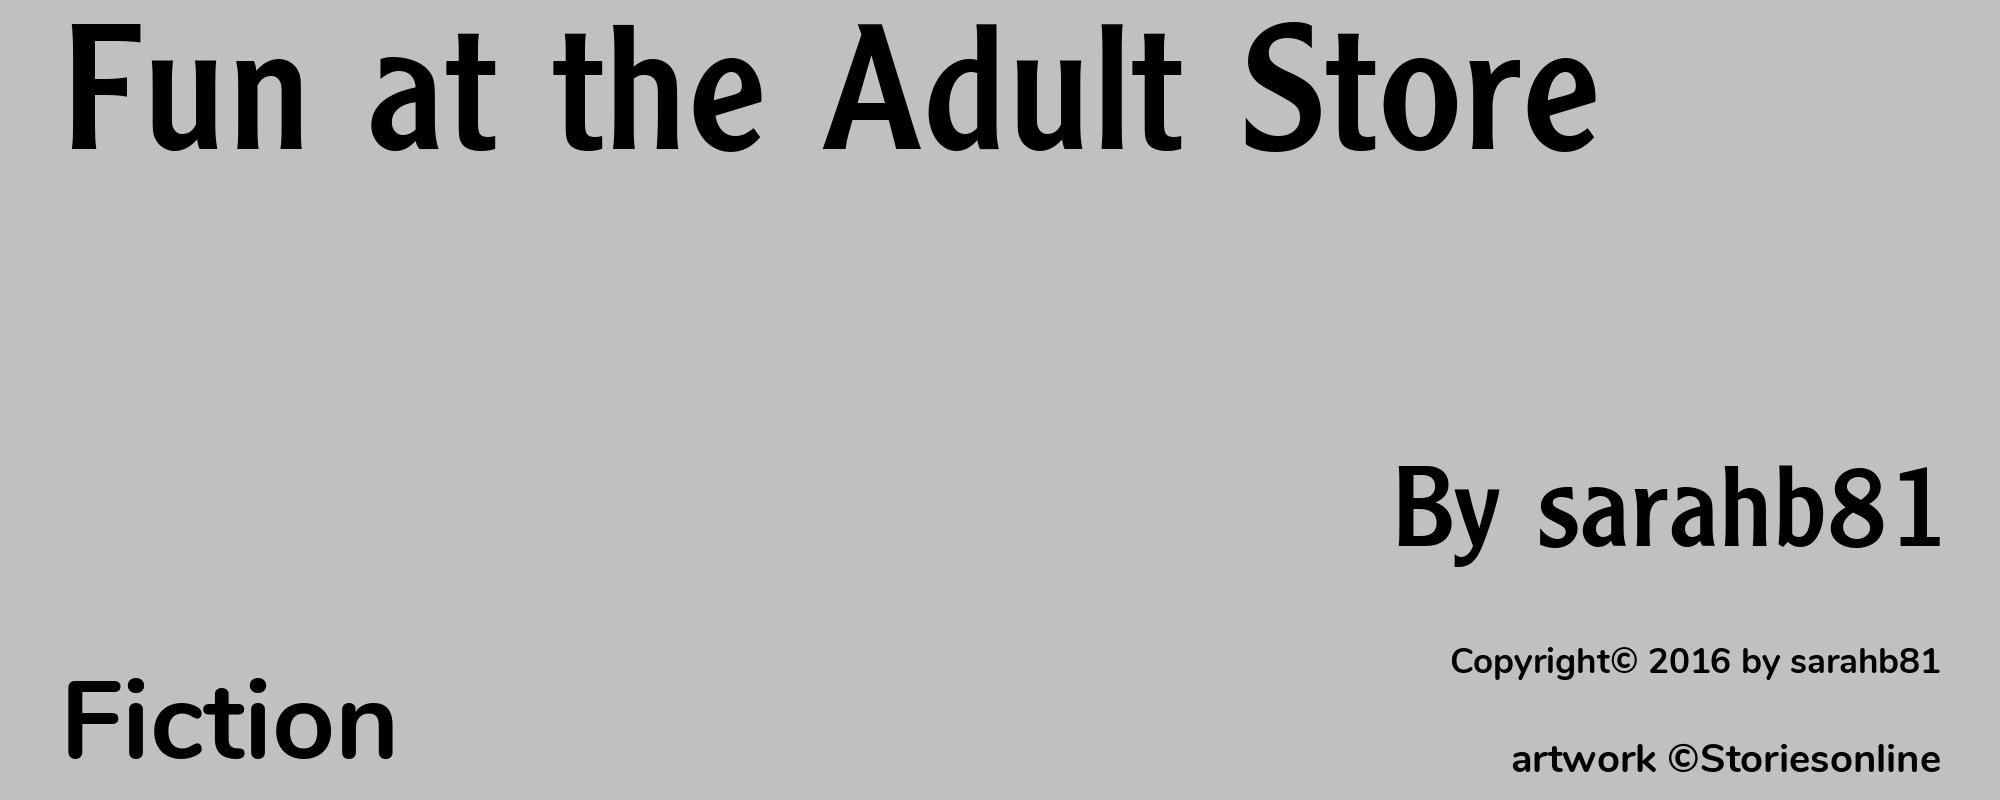 Fun at the Adult Store - Cover